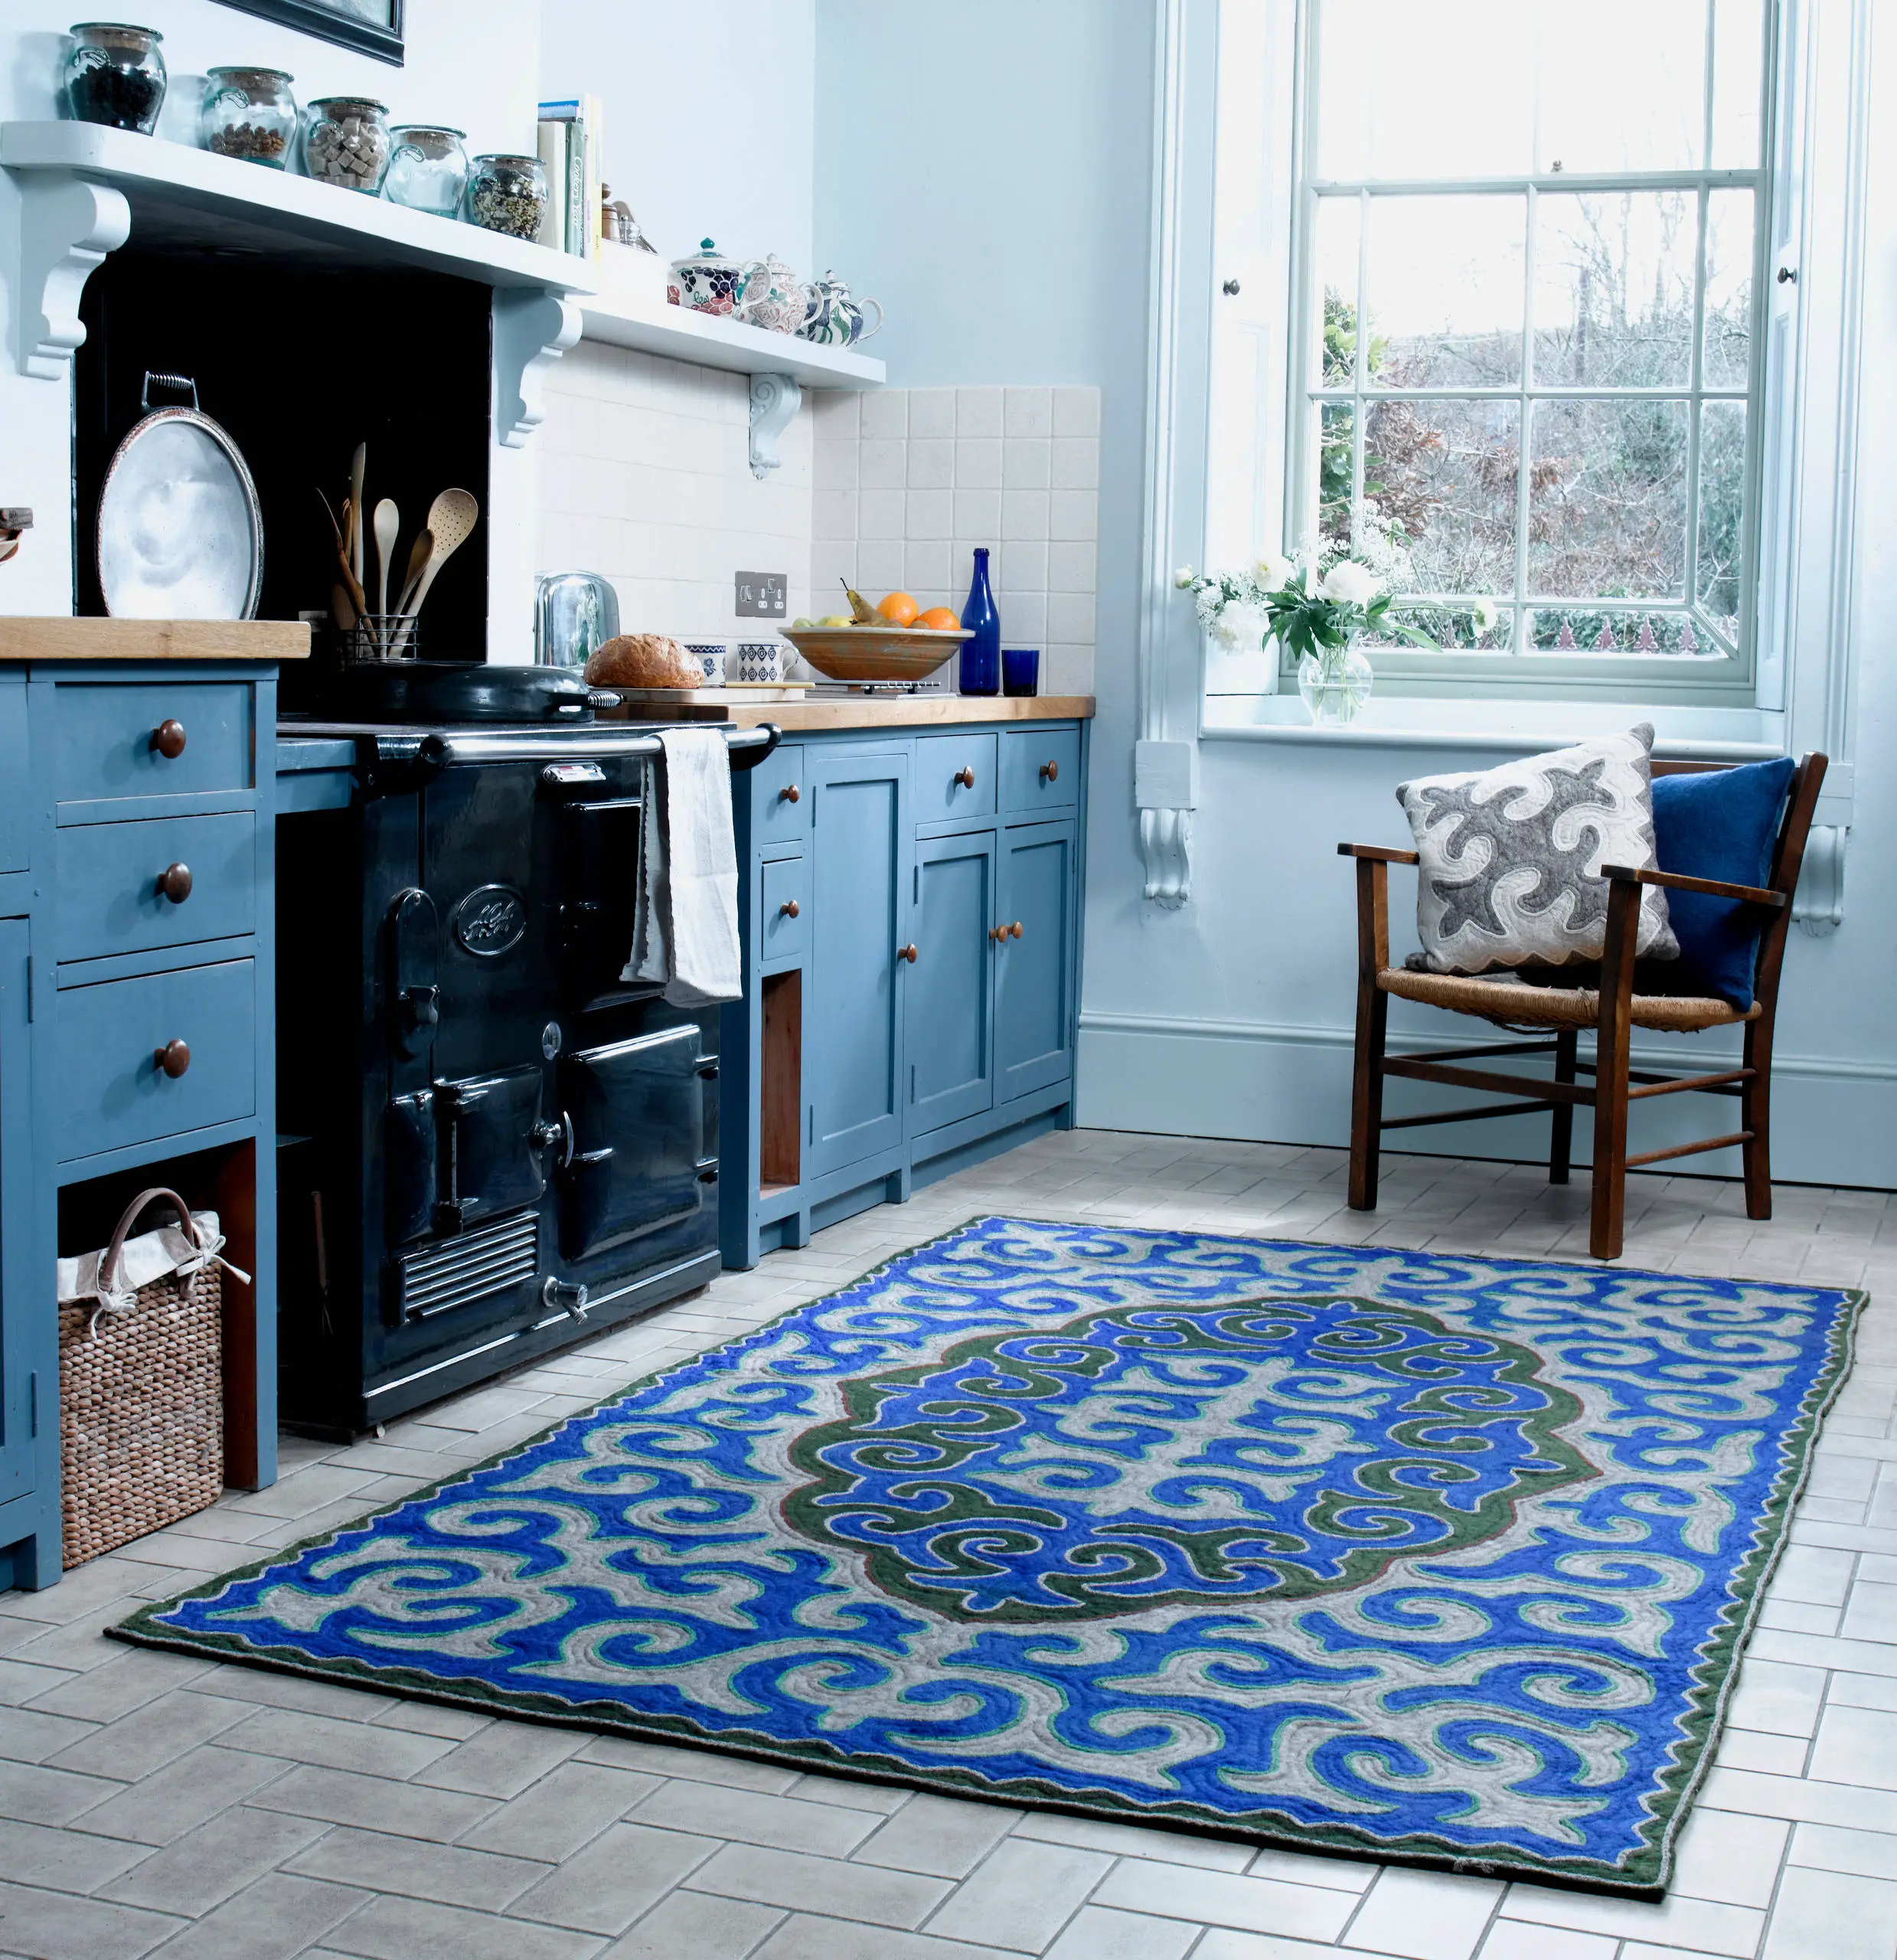 Bring A Folky Feel With An Antique Rug